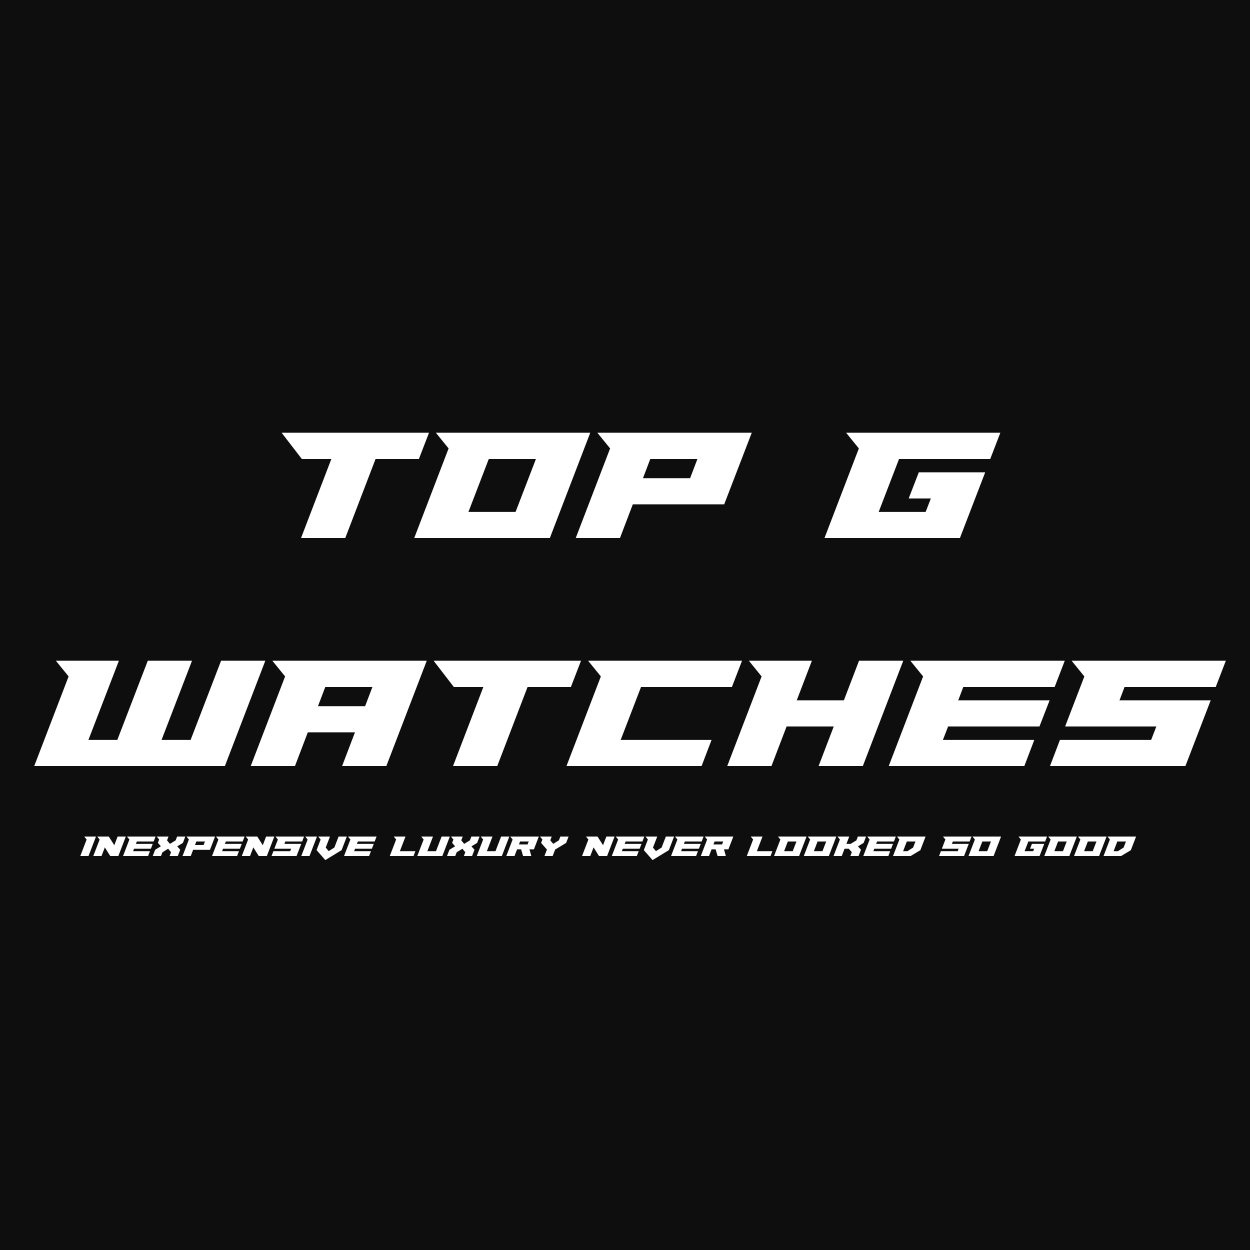 TOP G WATCHES - INEXPENSIVE LUXURY NEVER LOOKED SO GOOD